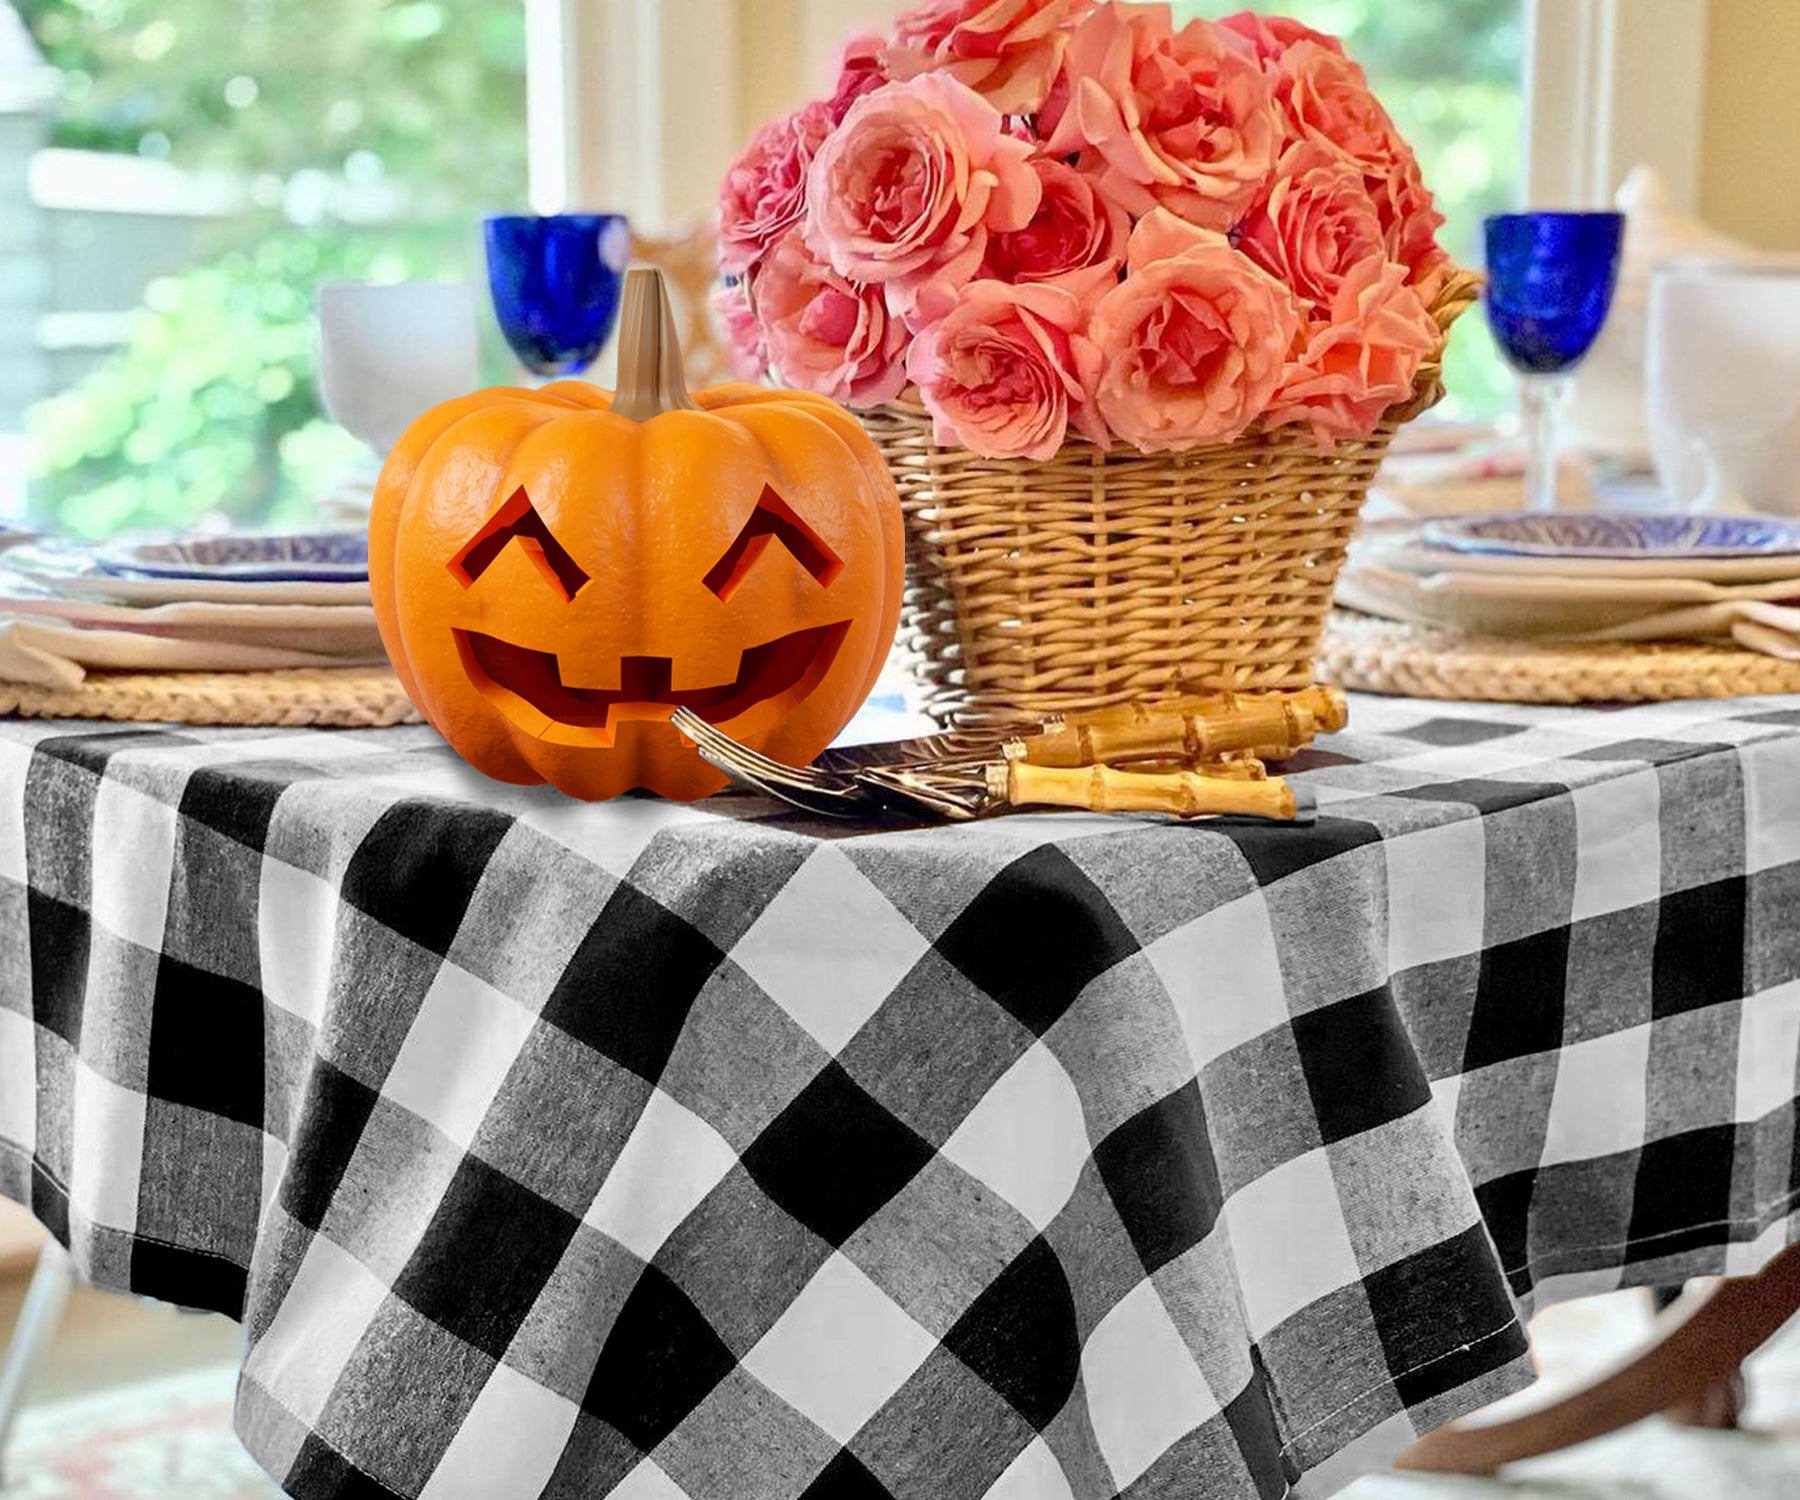 For elegant dining, choose from a variety of options: black, round, white tablecloths, and 60 round tablecloth styles to match your preferences and occasions.